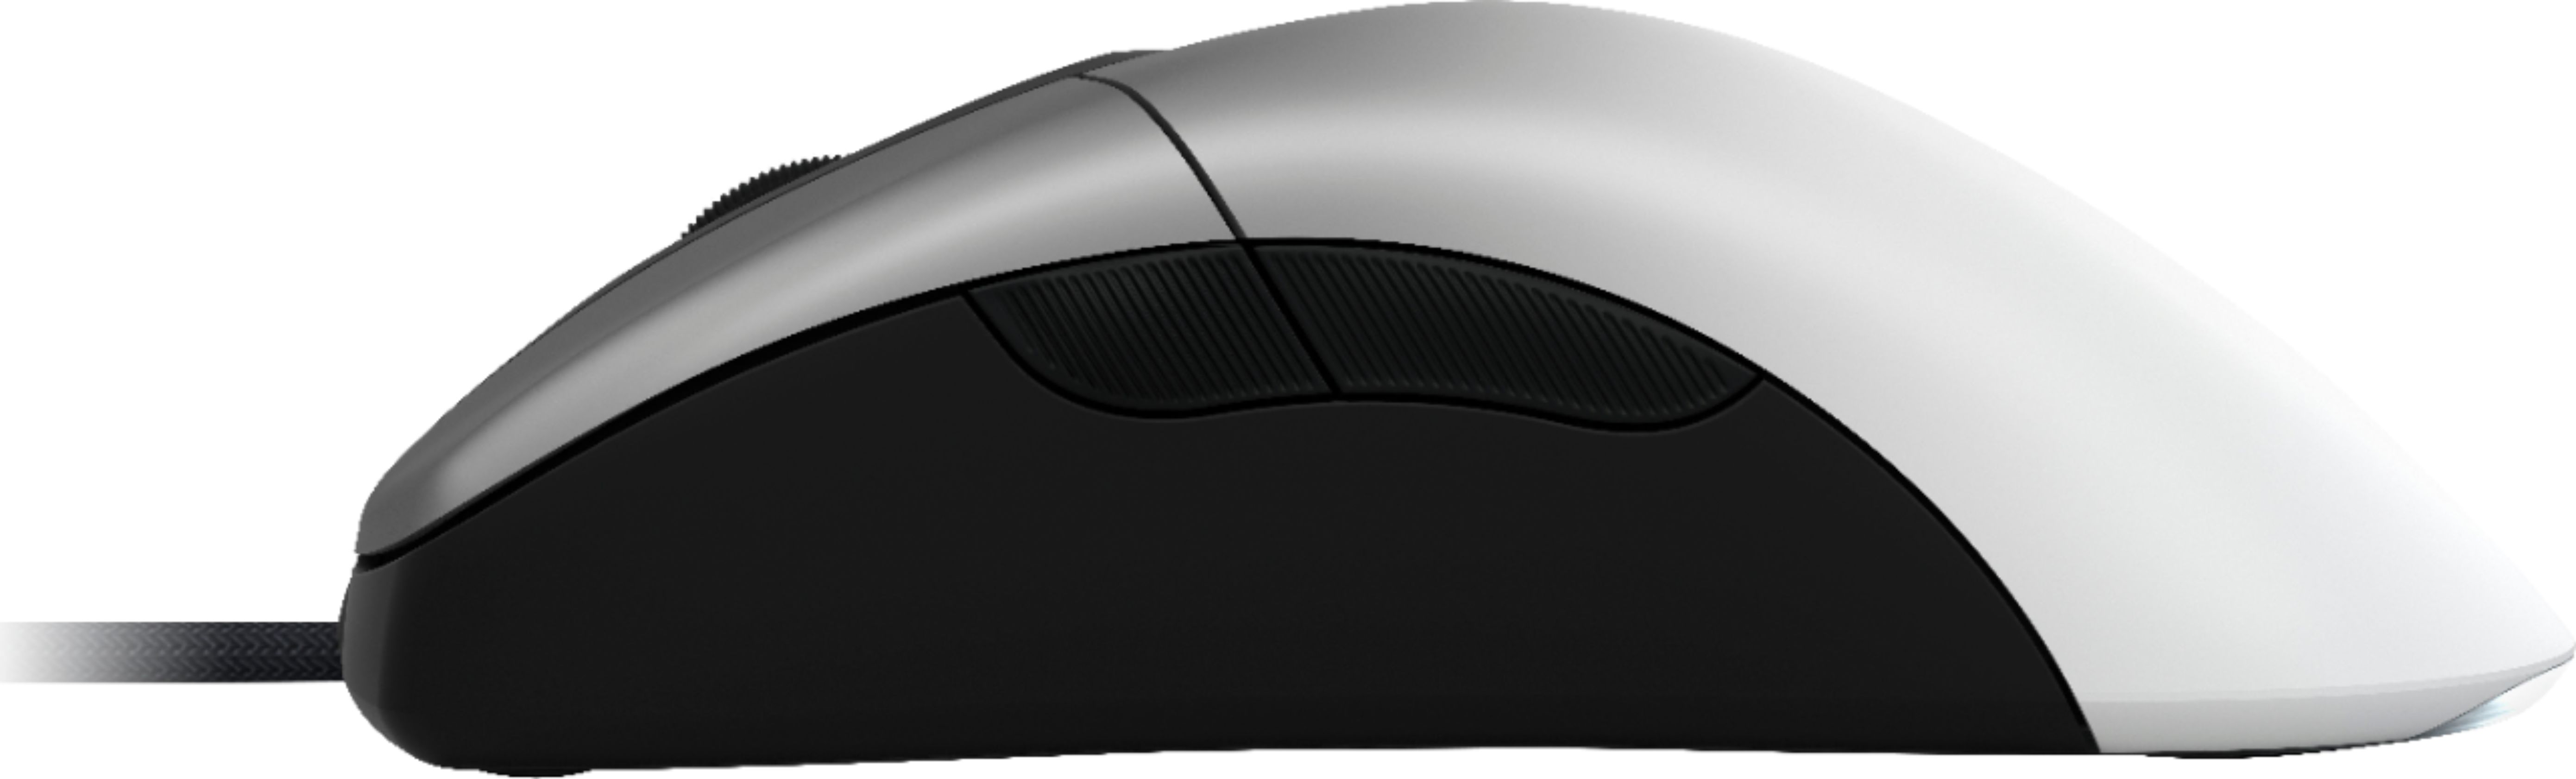 Best Buy: Microsoft Pro IntelliMouse Wired Optical Gaming Mouse